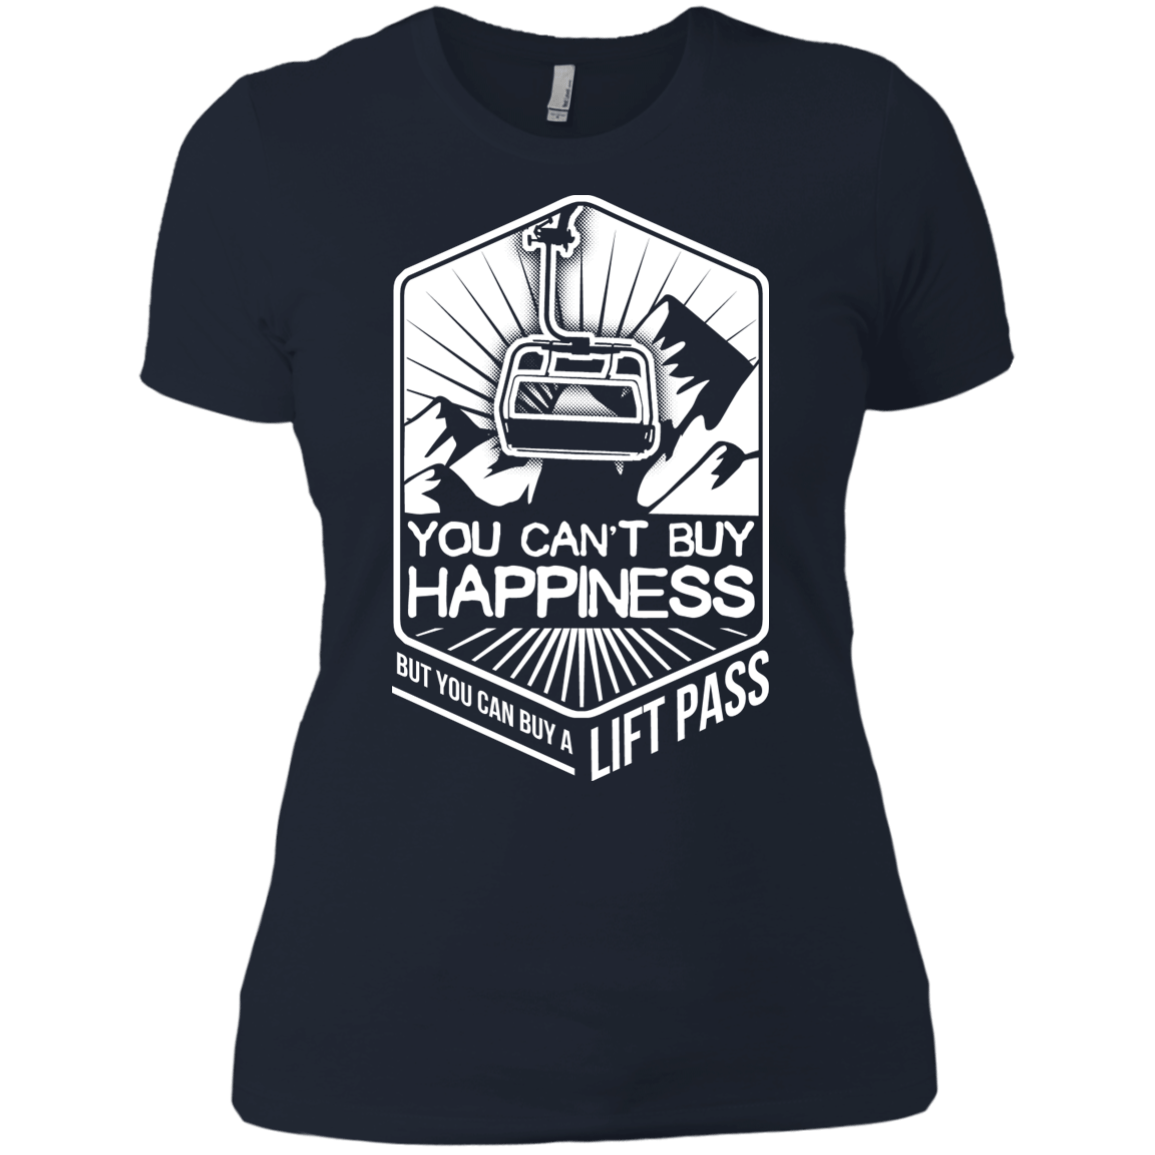 You Can't Buy Happiness But You Can Buy A Lift Pass Ladies Tees - Powderaddicts